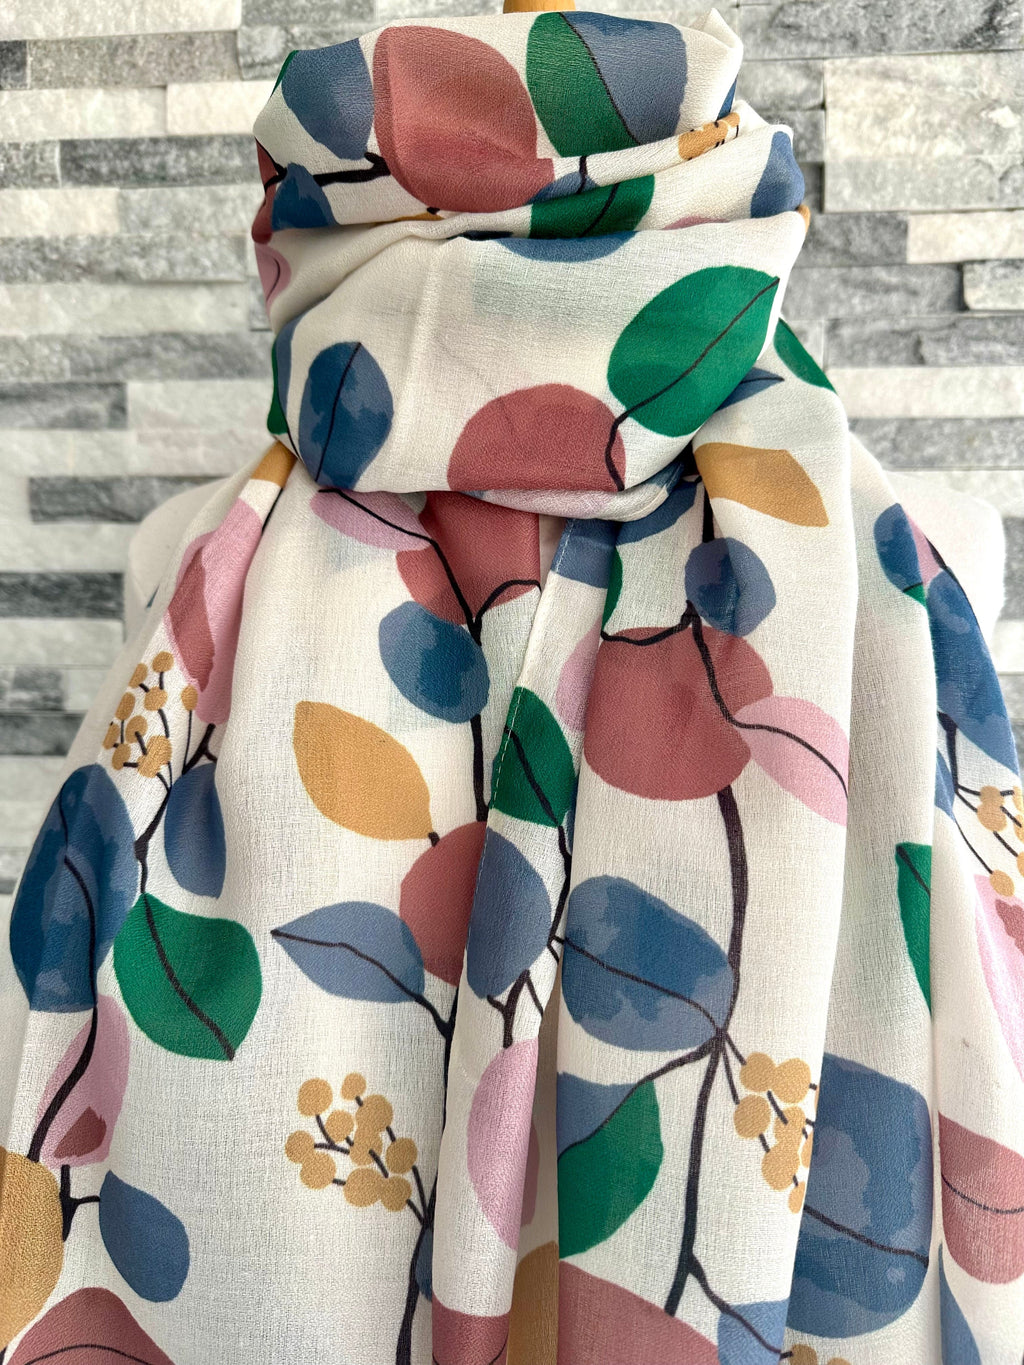 luscious scarves Off White, Blue , Green and Pink Large Leafy Leaves Scarf.